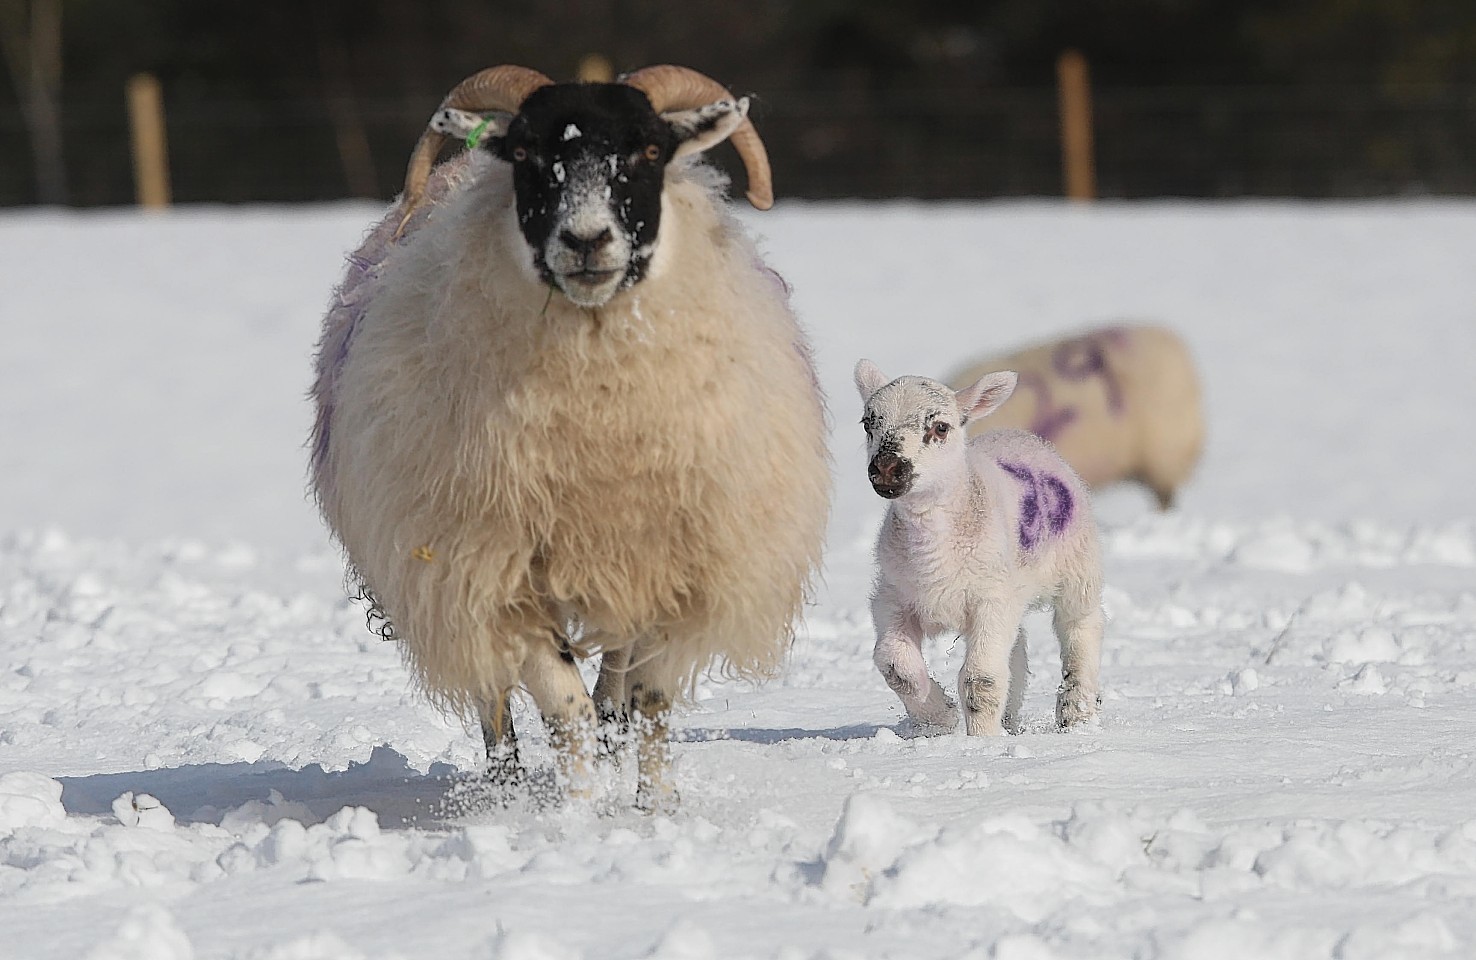 Lambs in the snow at a farm near Inverness. Photo by Peter Jolly 